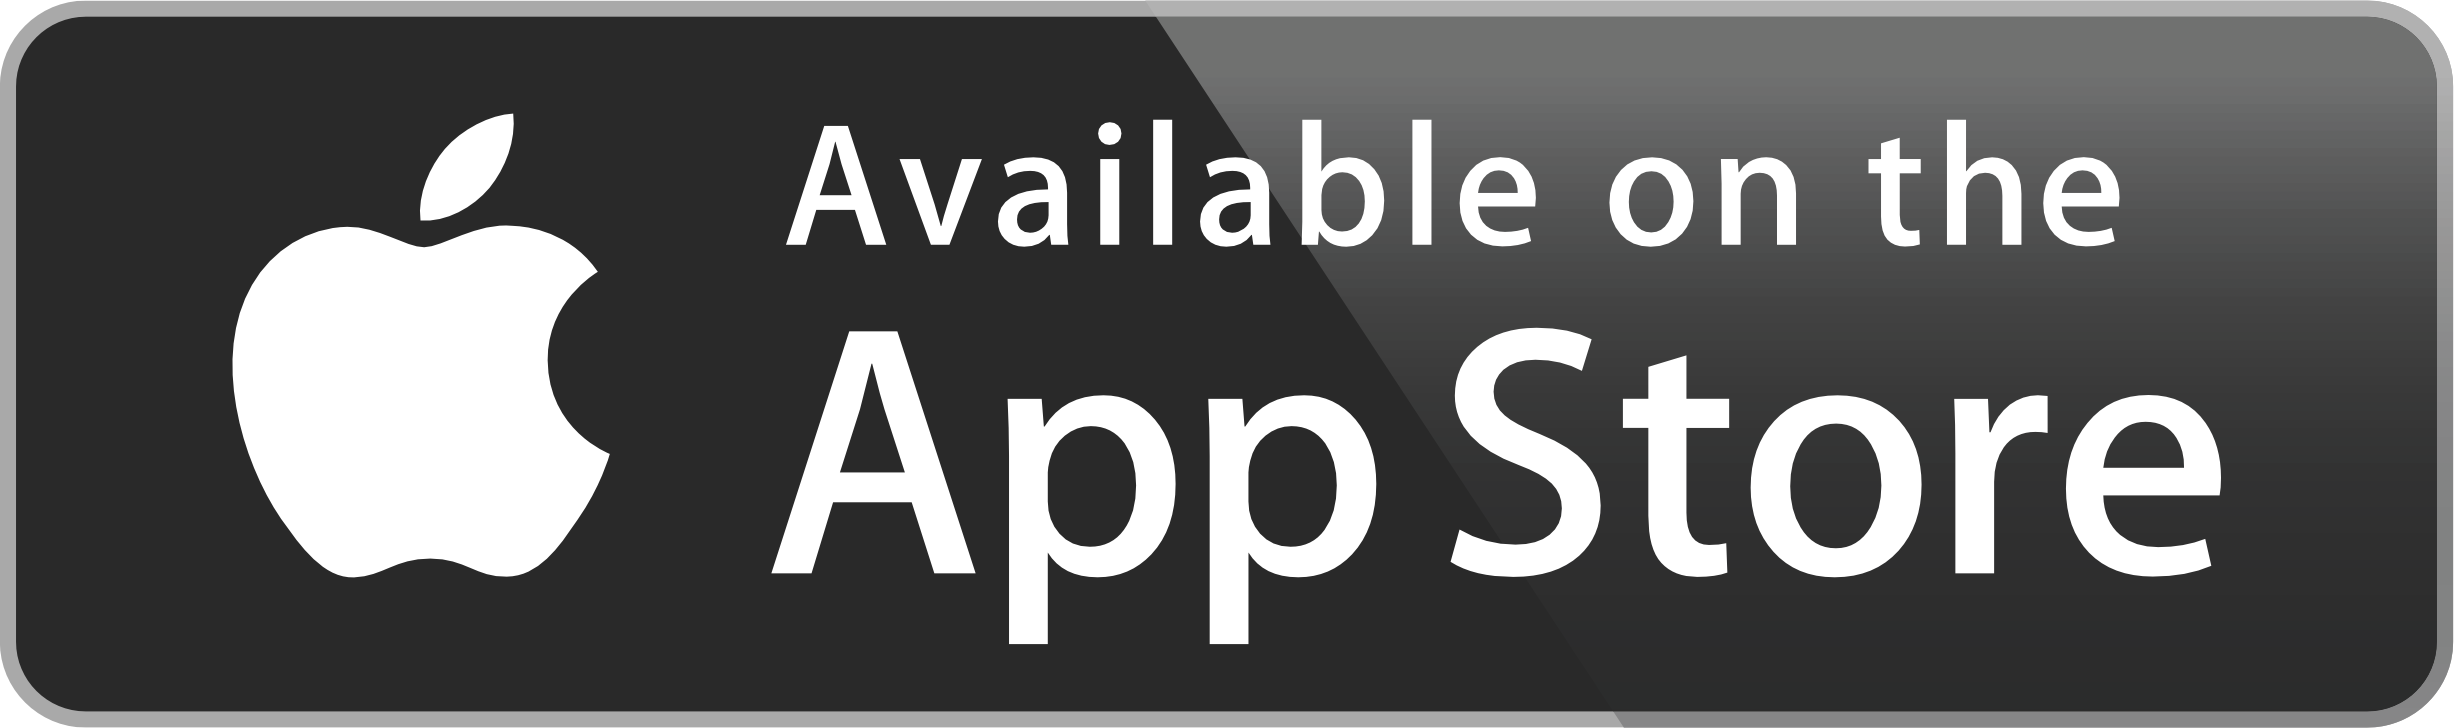 Available_on_the_App_Store__black_.png